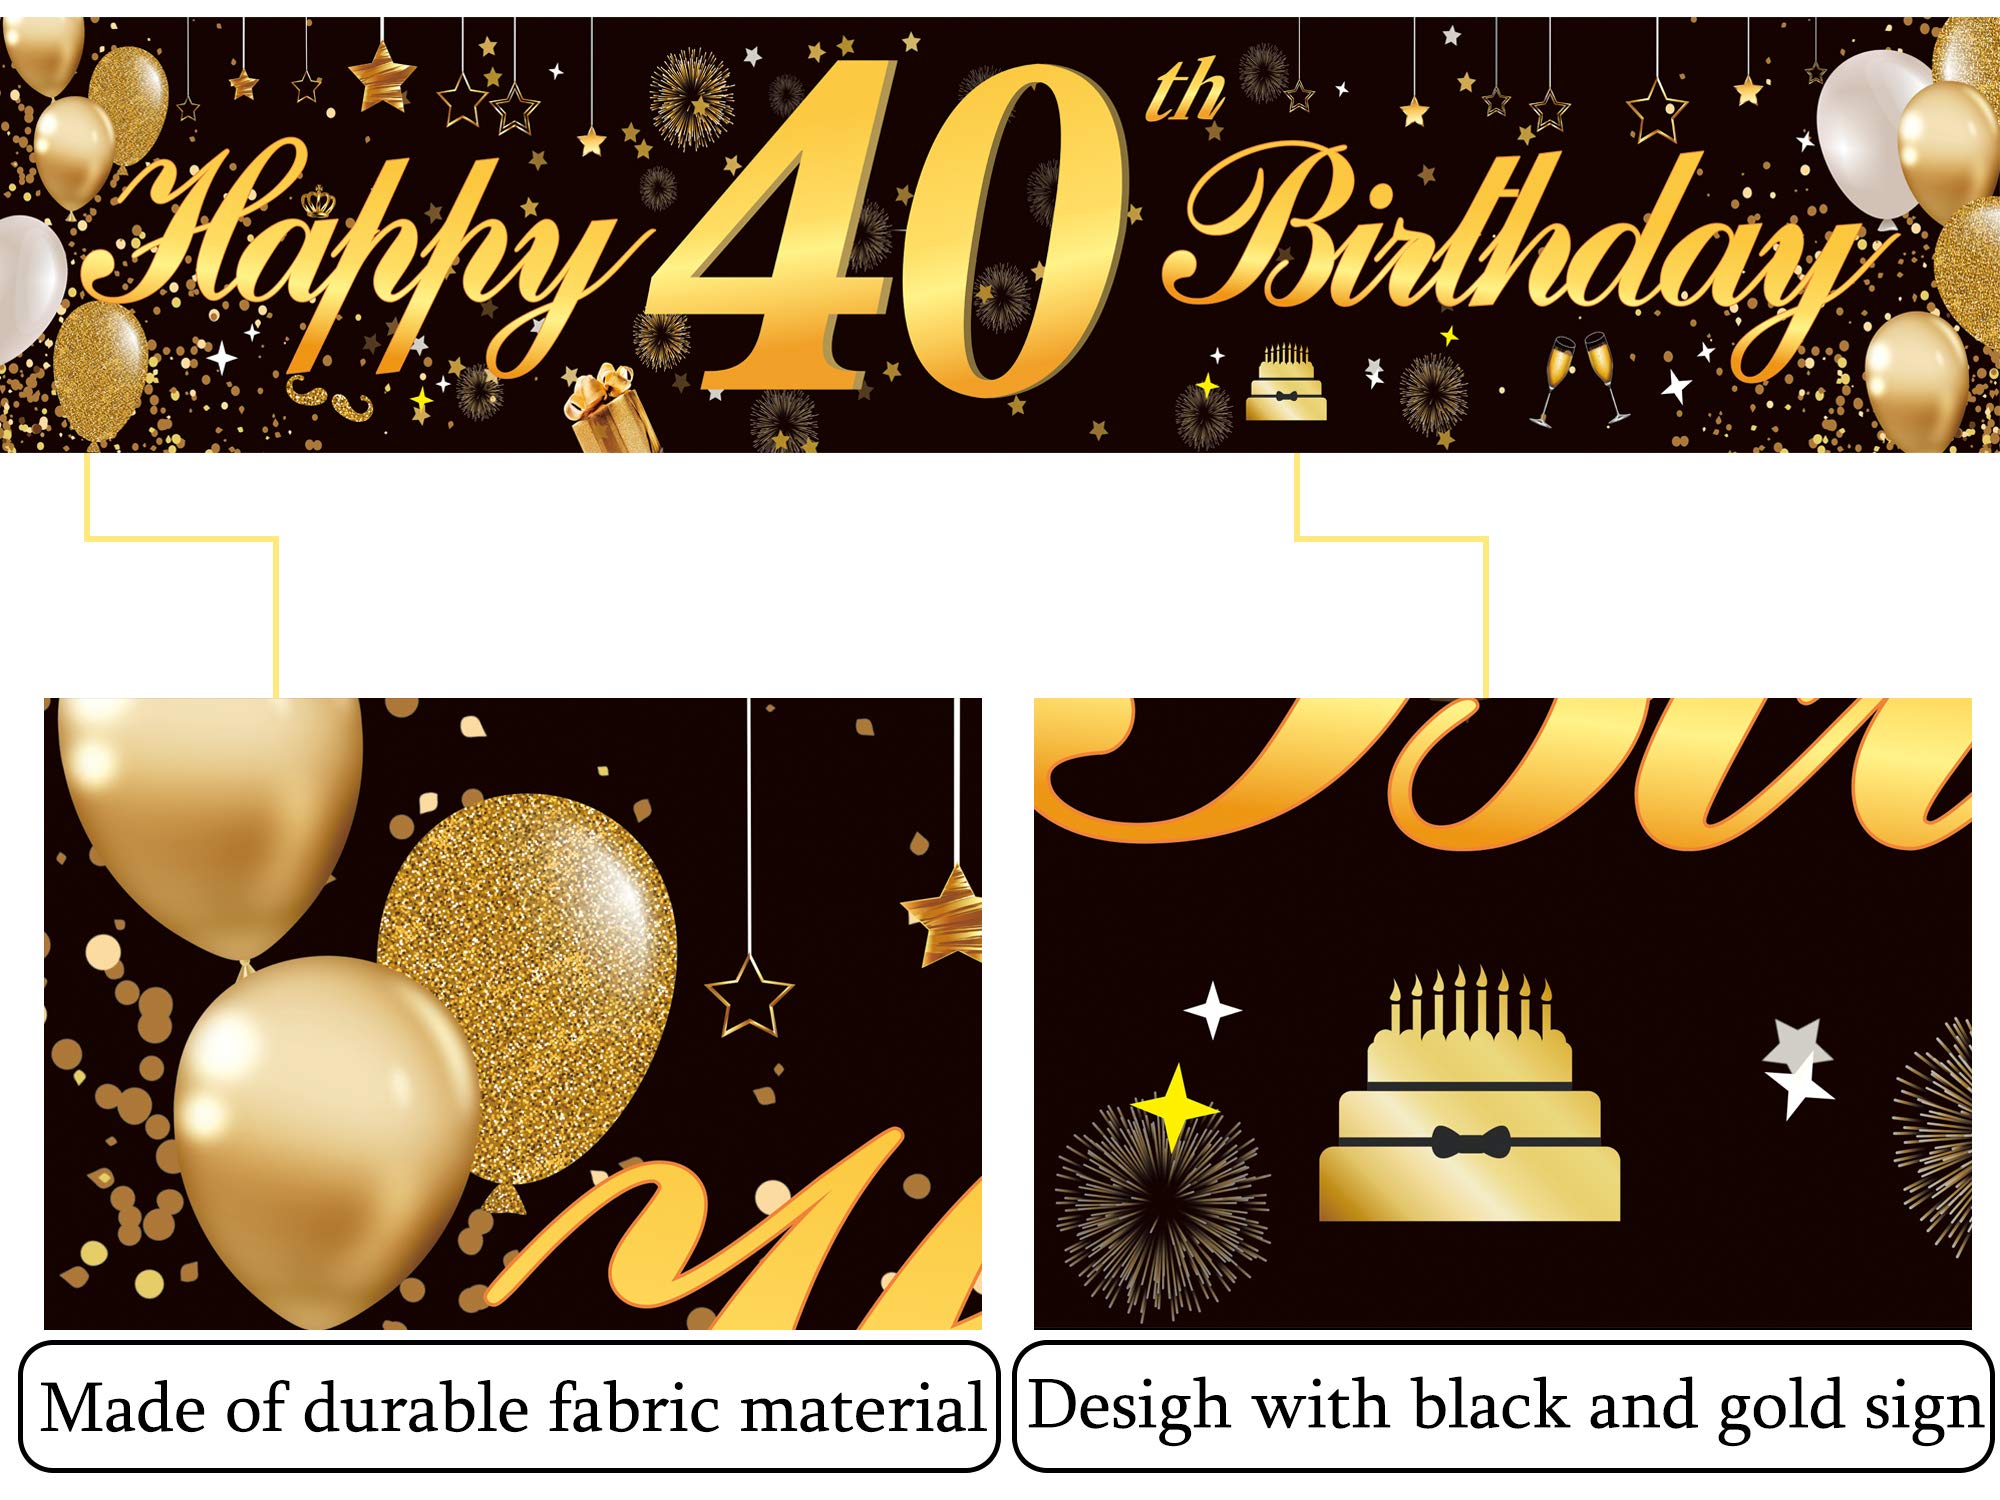 Happy 50th Birthday Banner,Birthday Party Sign Backdrop Banner For Men Women Cheer to 50 Years,Durable Black&Gold Glitter Birthday Sign Yard Sign For 50th Birthday Party Decoration Supplies(50 Black)